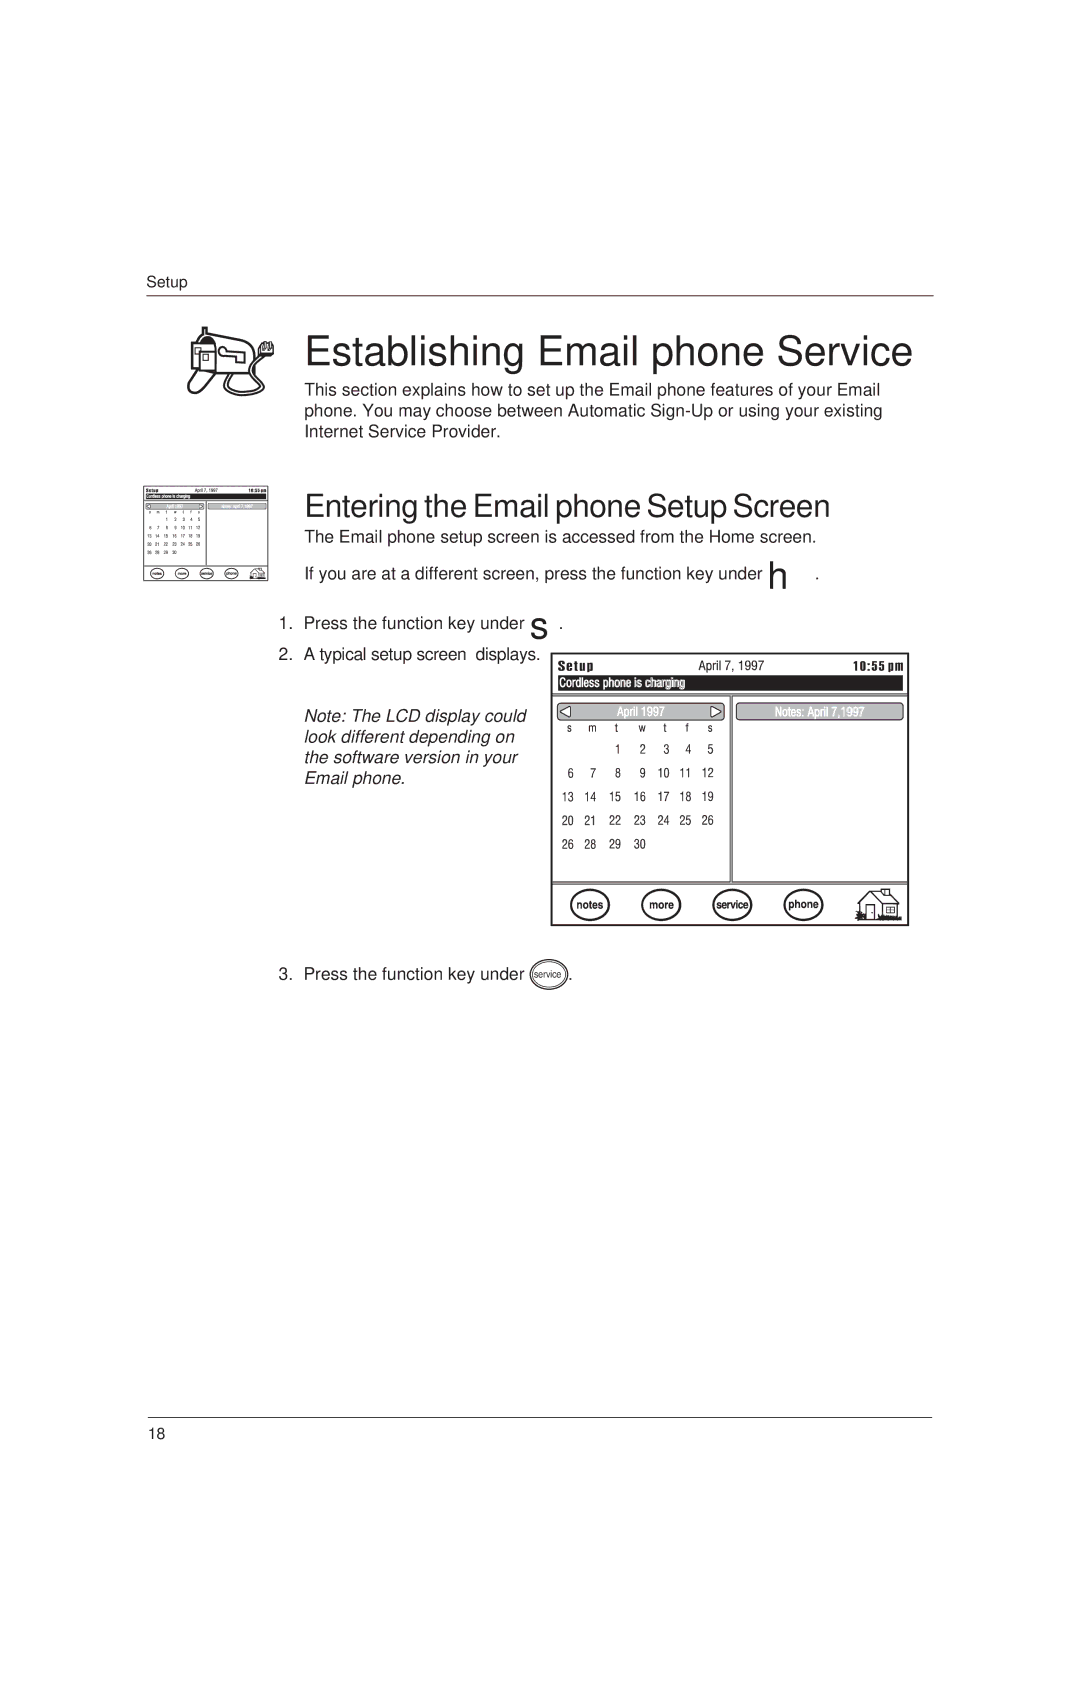 Uniden EP100, EP200 manual Establishing Email phone Service, Entering the Email phone Setup Screen 